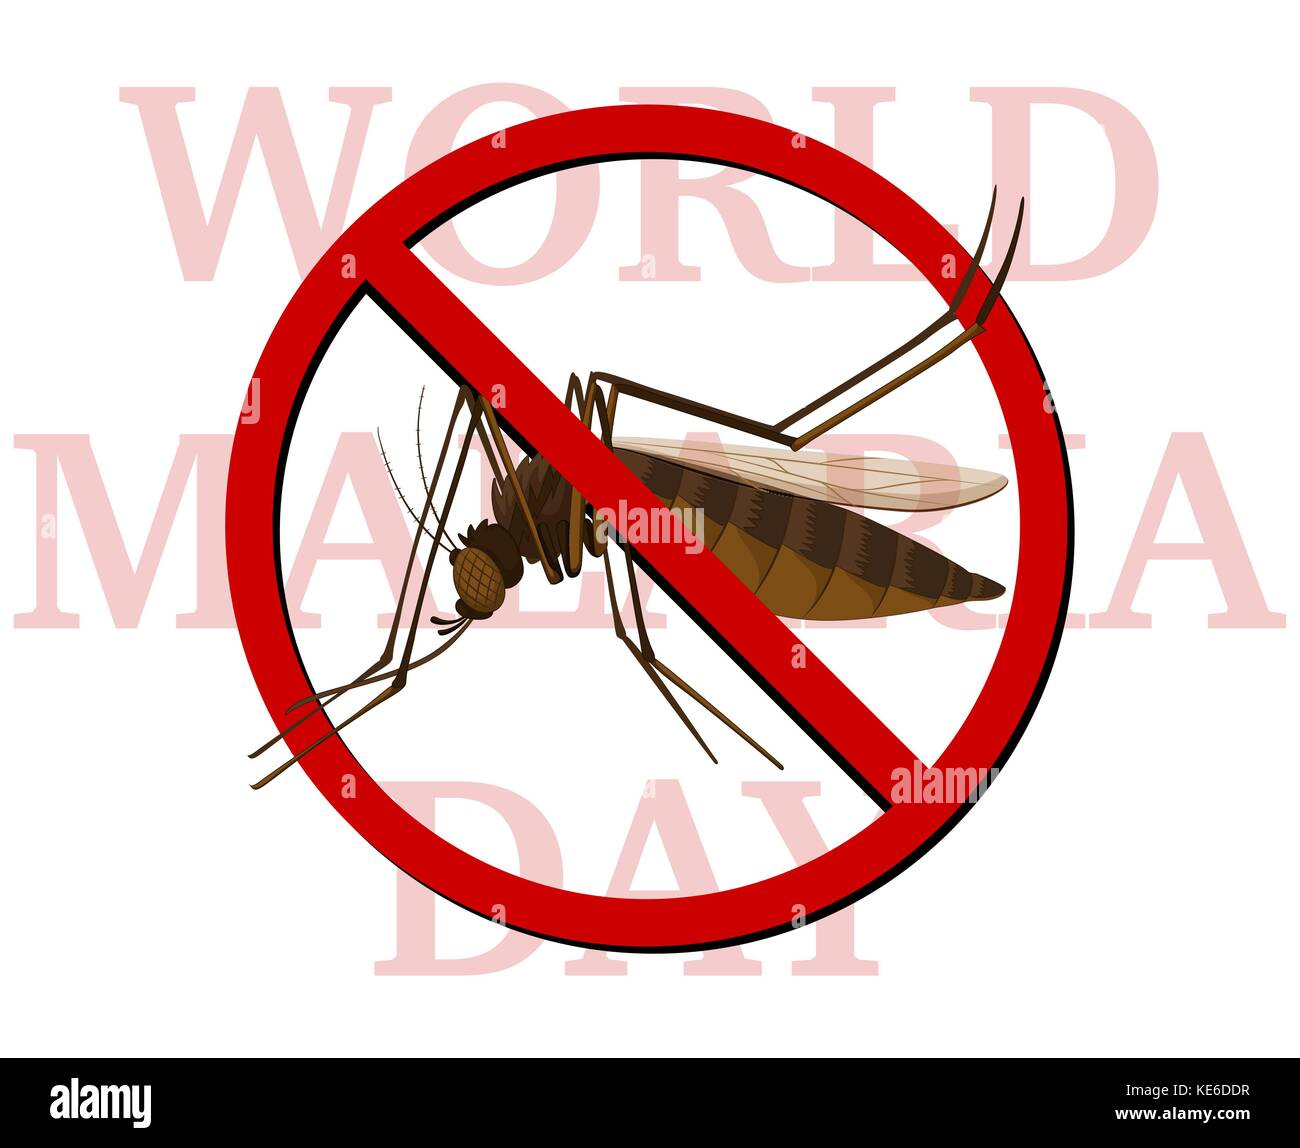 World malaria day poster with no mosquito illustration Stock Vector